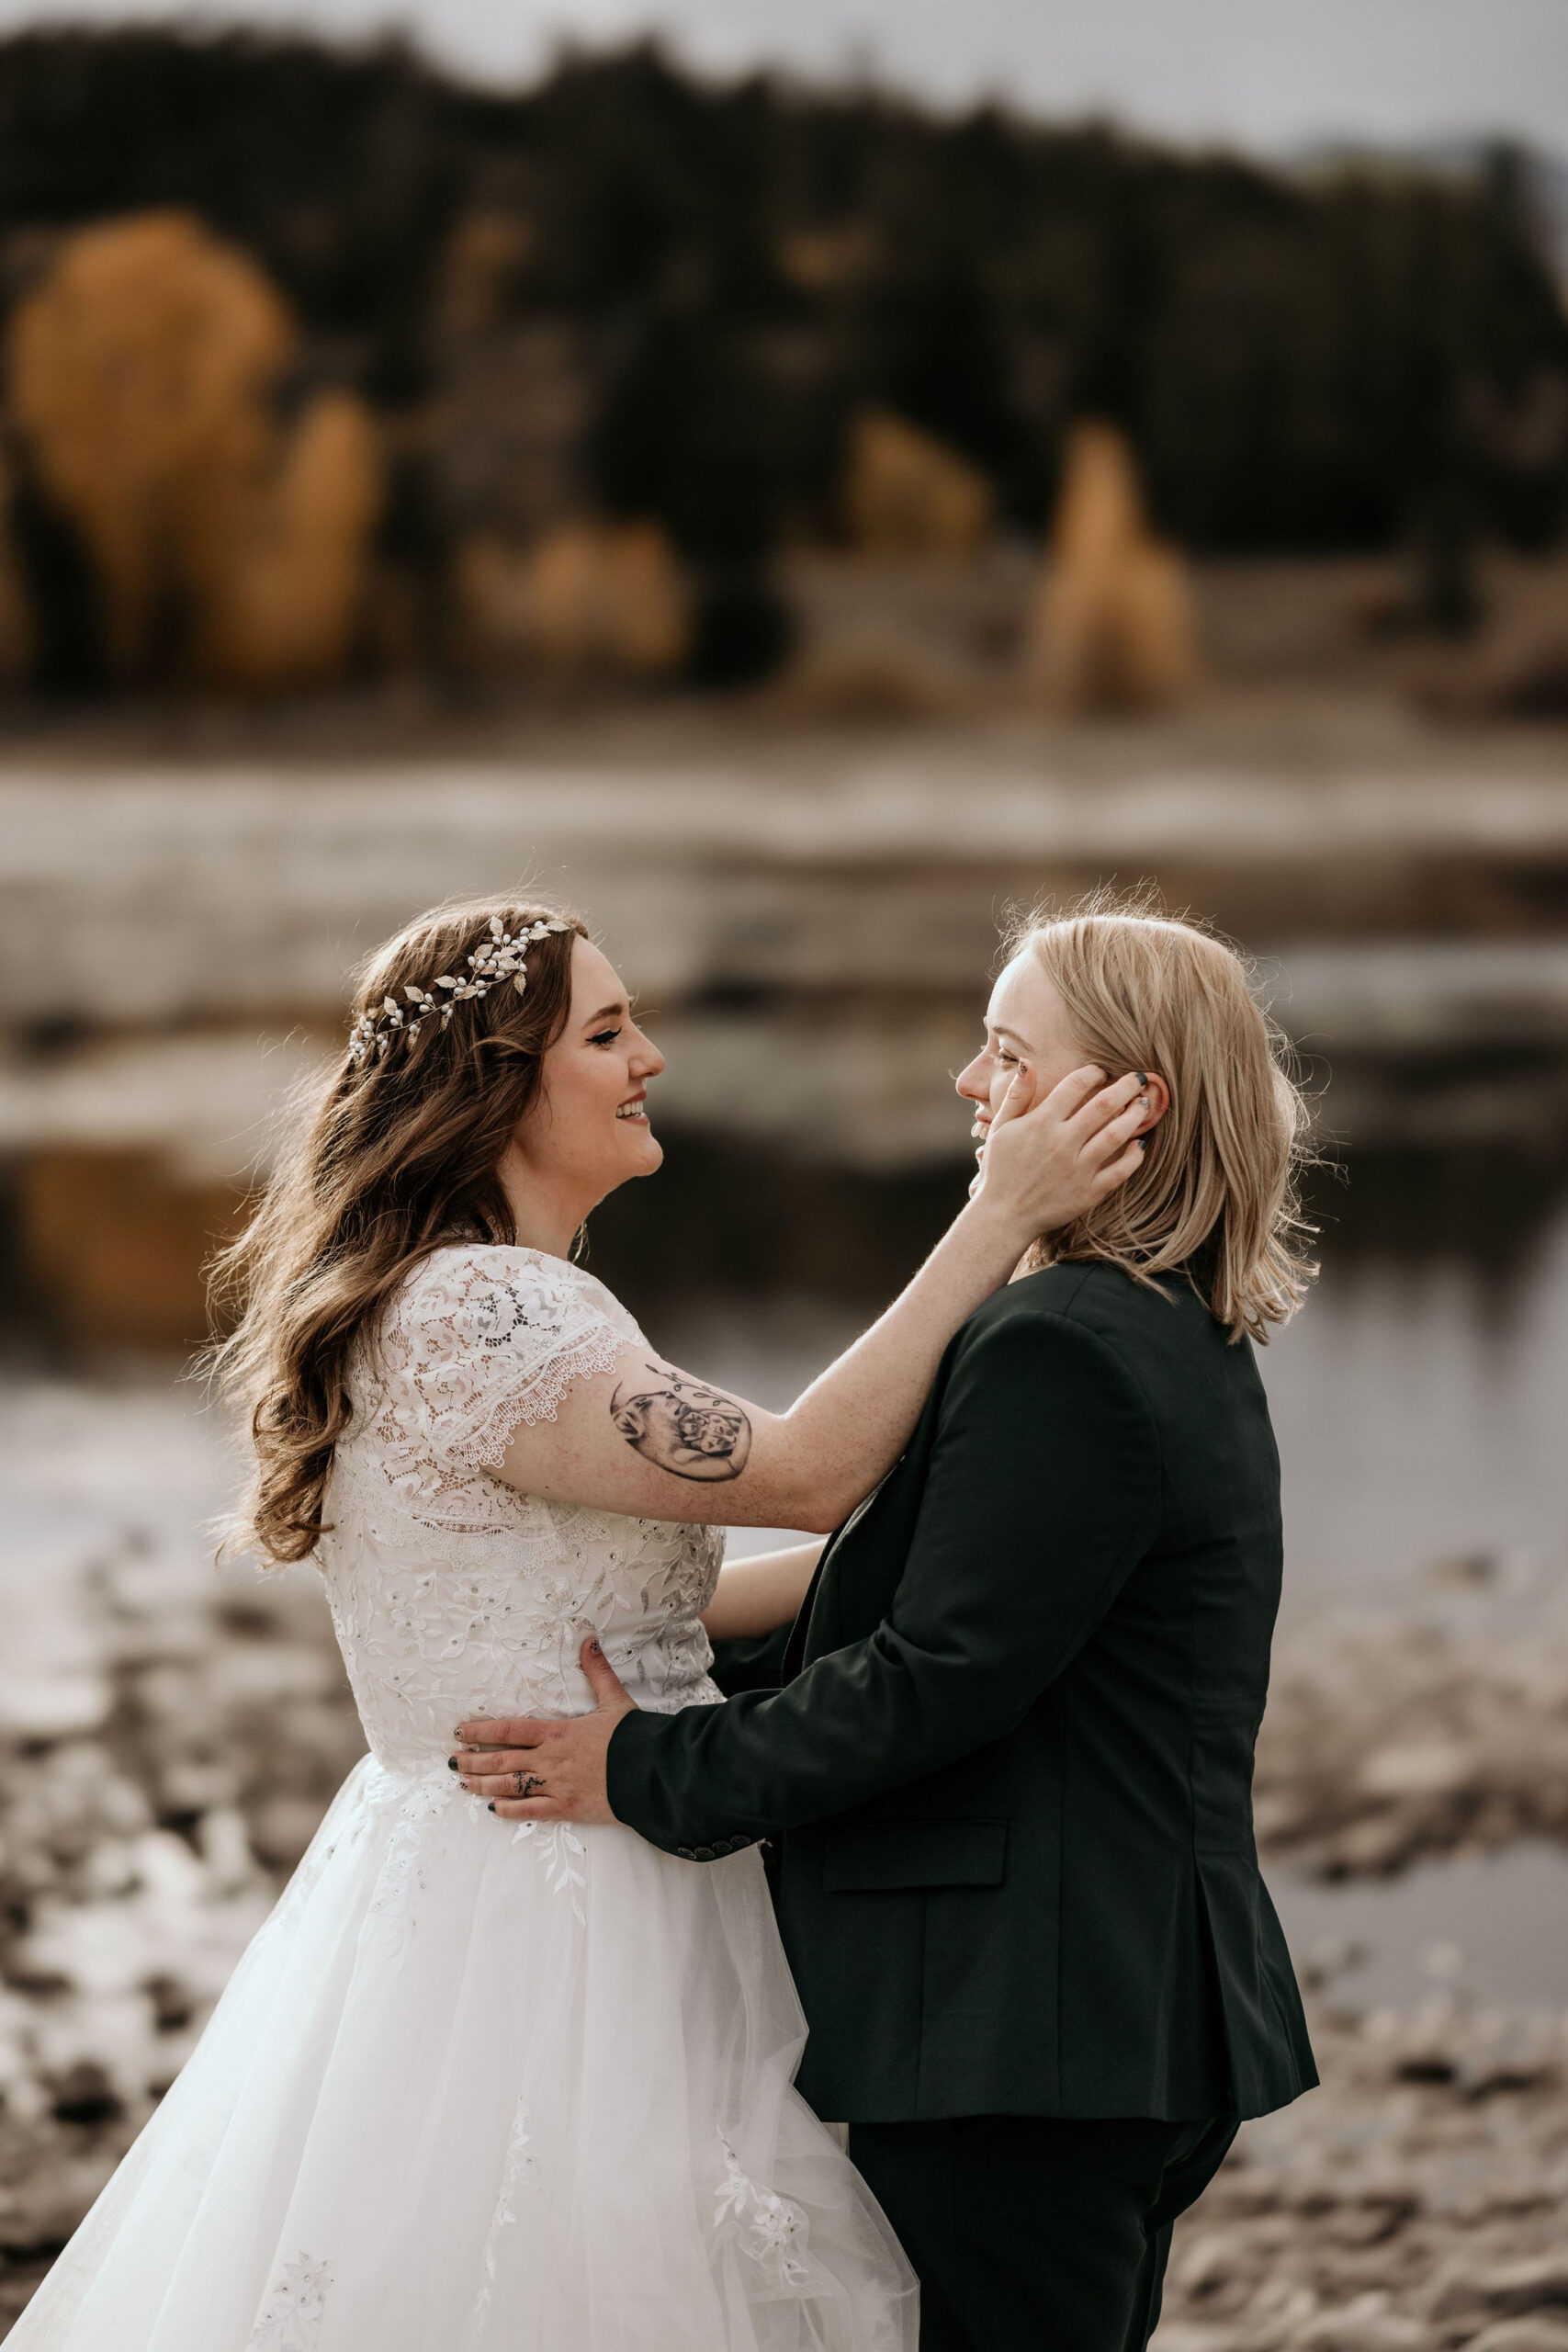 LGBTQ+ couple smiles at each other during colorado wedding day in the mountains